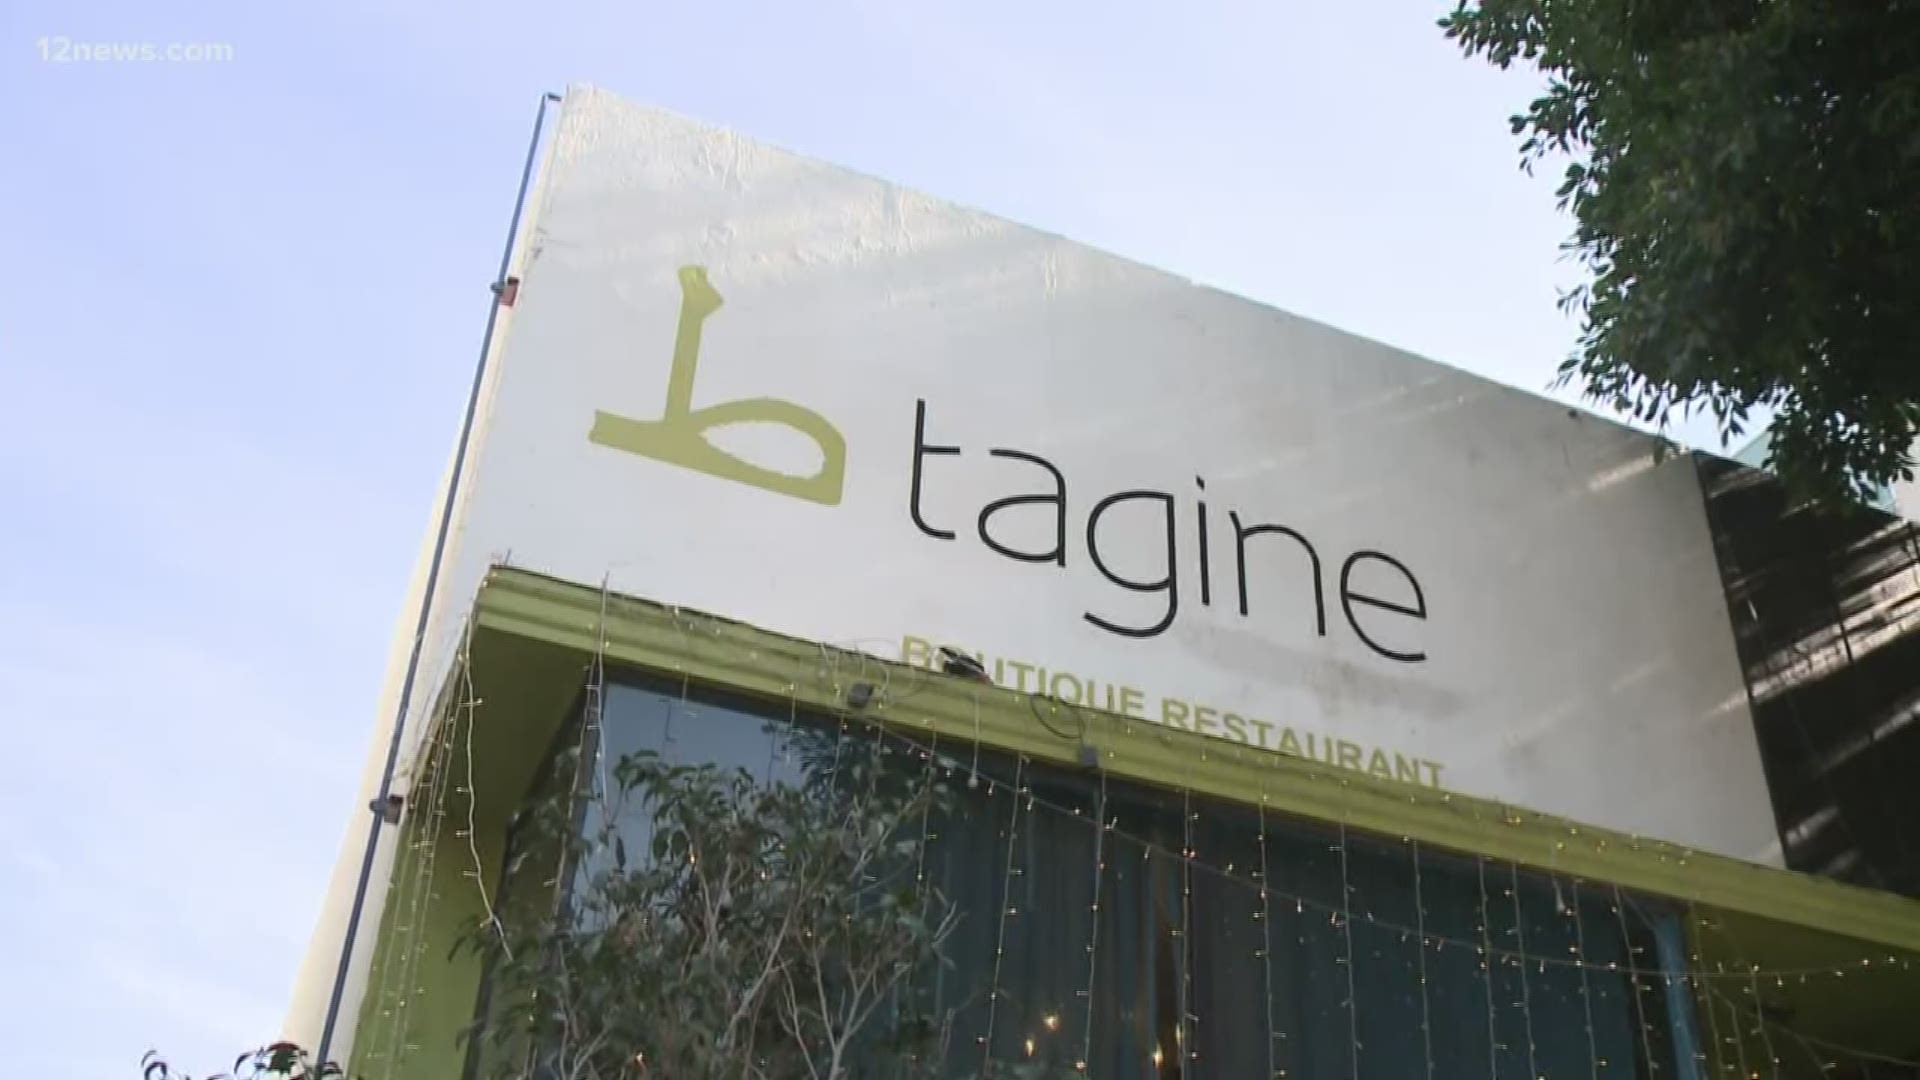 12 News Krystle Henderson helped prepare some of the Golden Globe inspired dish, drink and dessert with famous chef Ben at Tagine Restaurant owned by Ryan Gosling.